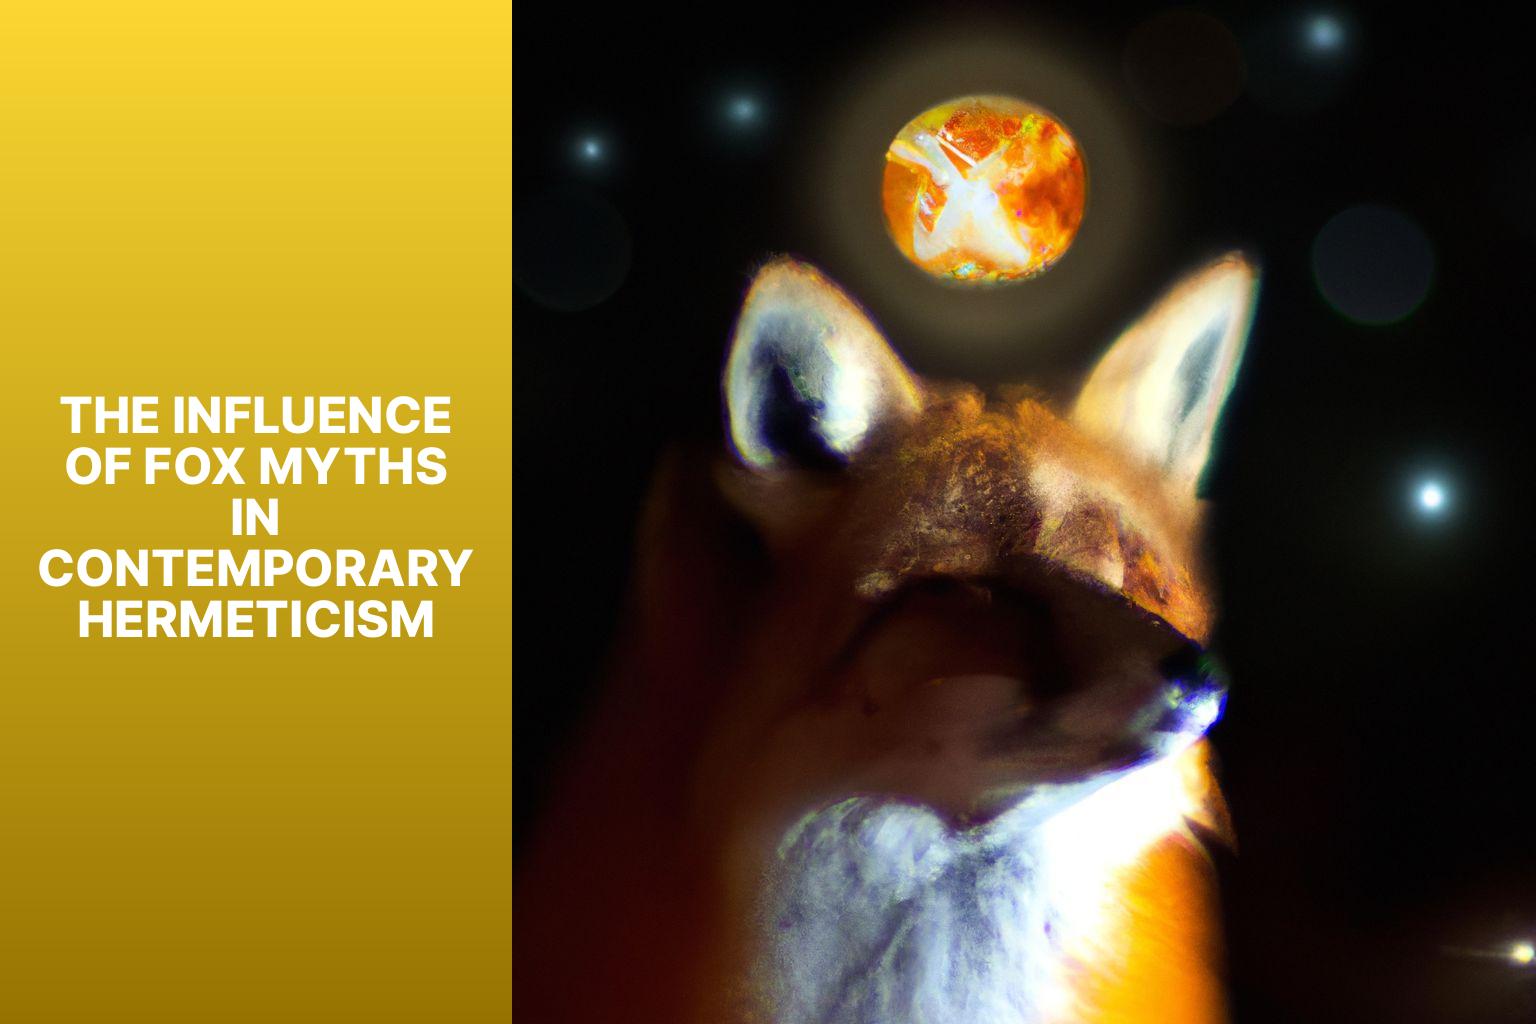 The Influence of Fox Myths in Contemporary Hermeticism - Fox Myths in Hermeticism 